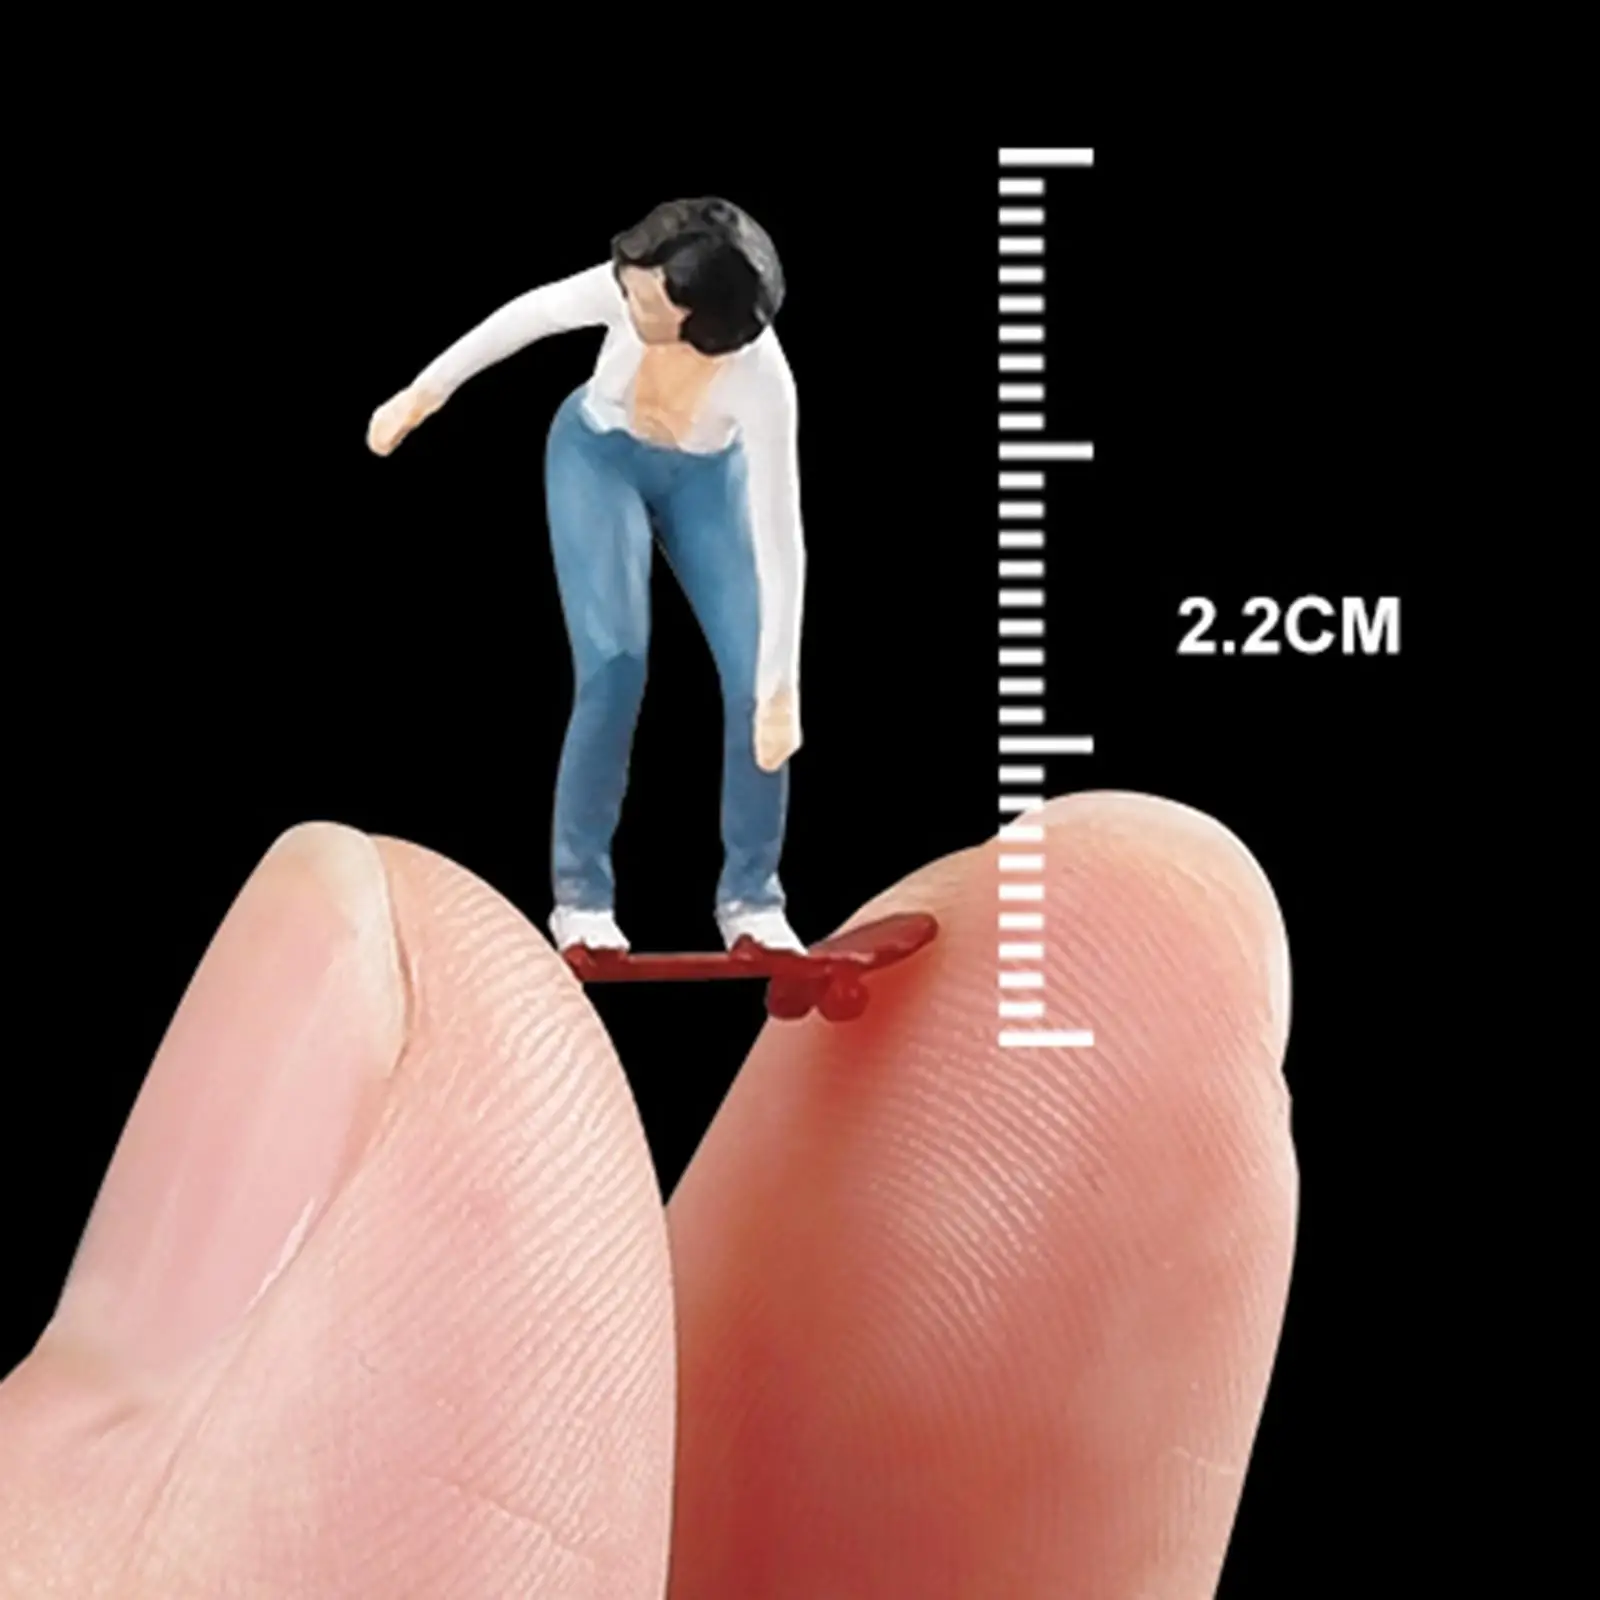 Miniature Figure Realistic Painted Doll Toy for Model Train Doll House Decoration Desktop Ornament Scene Layout DIY Projects